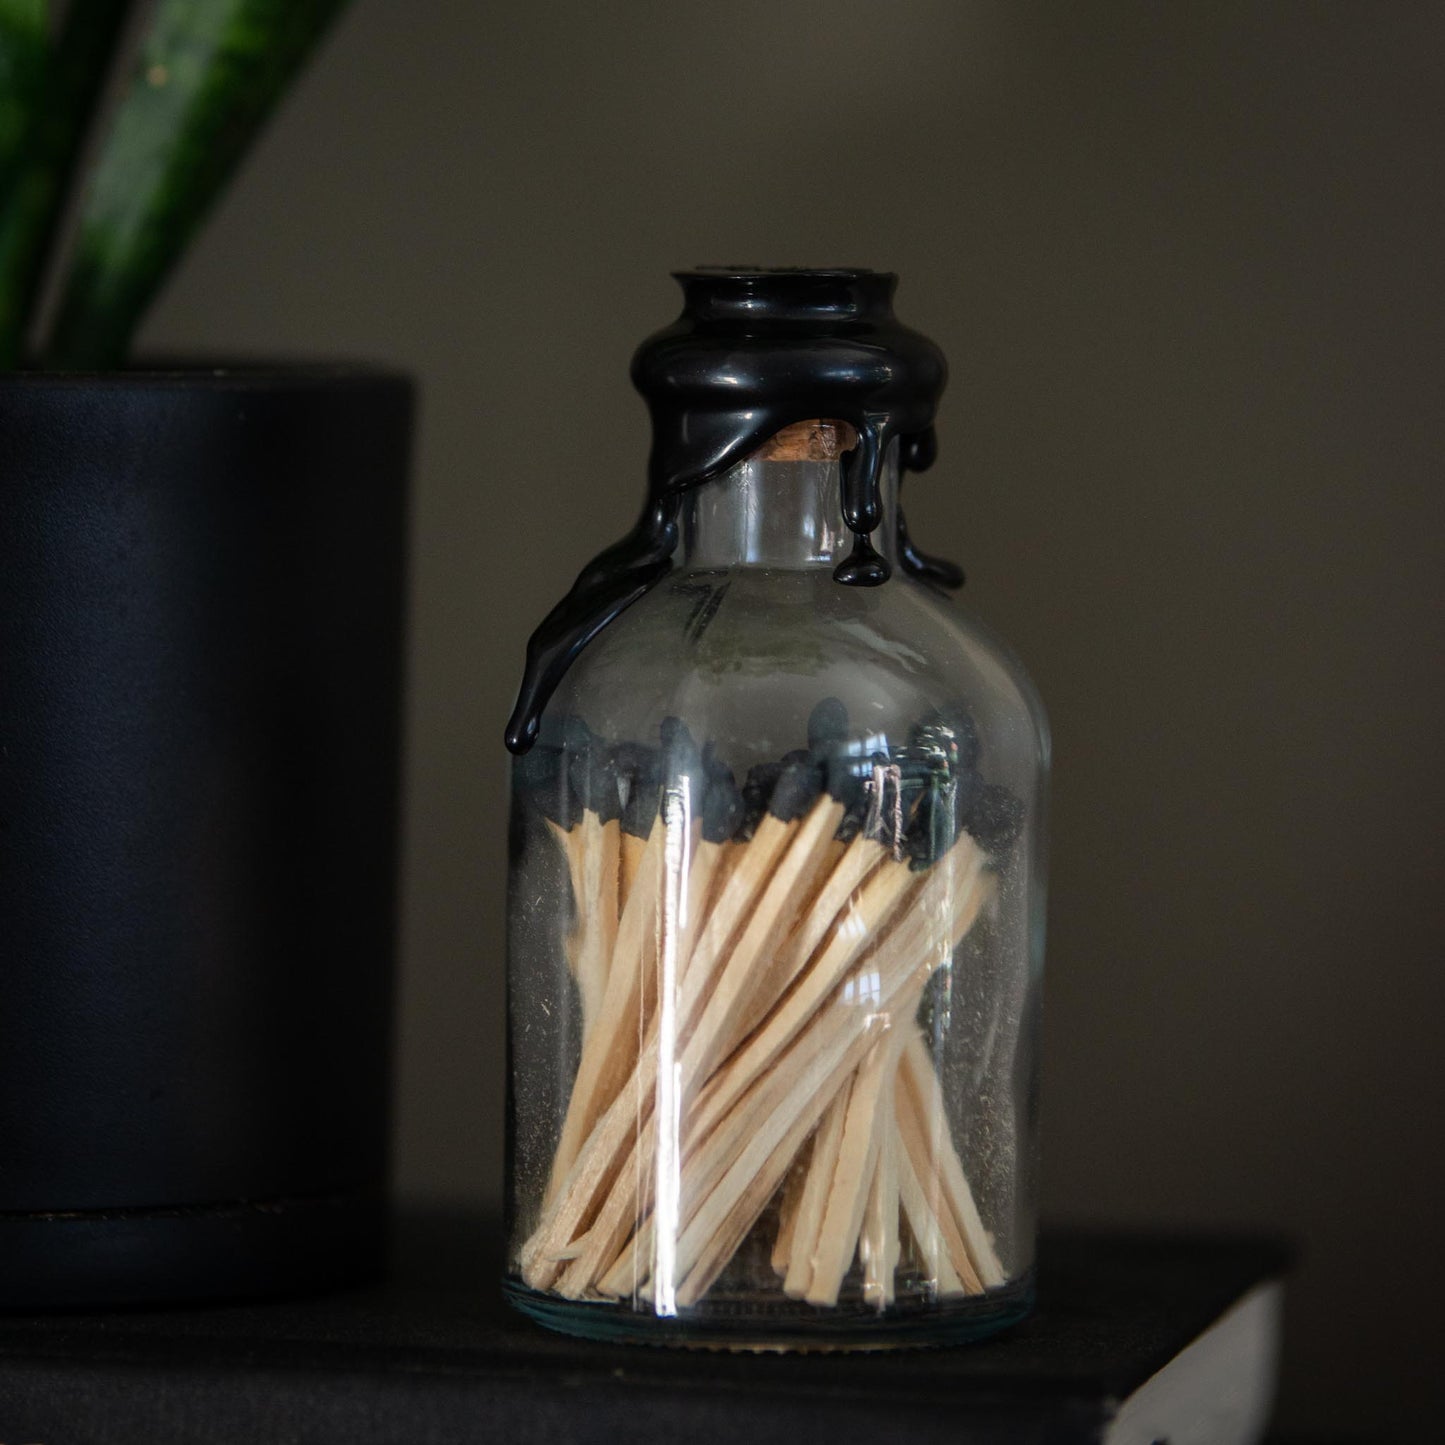 Glass Jar with Matches